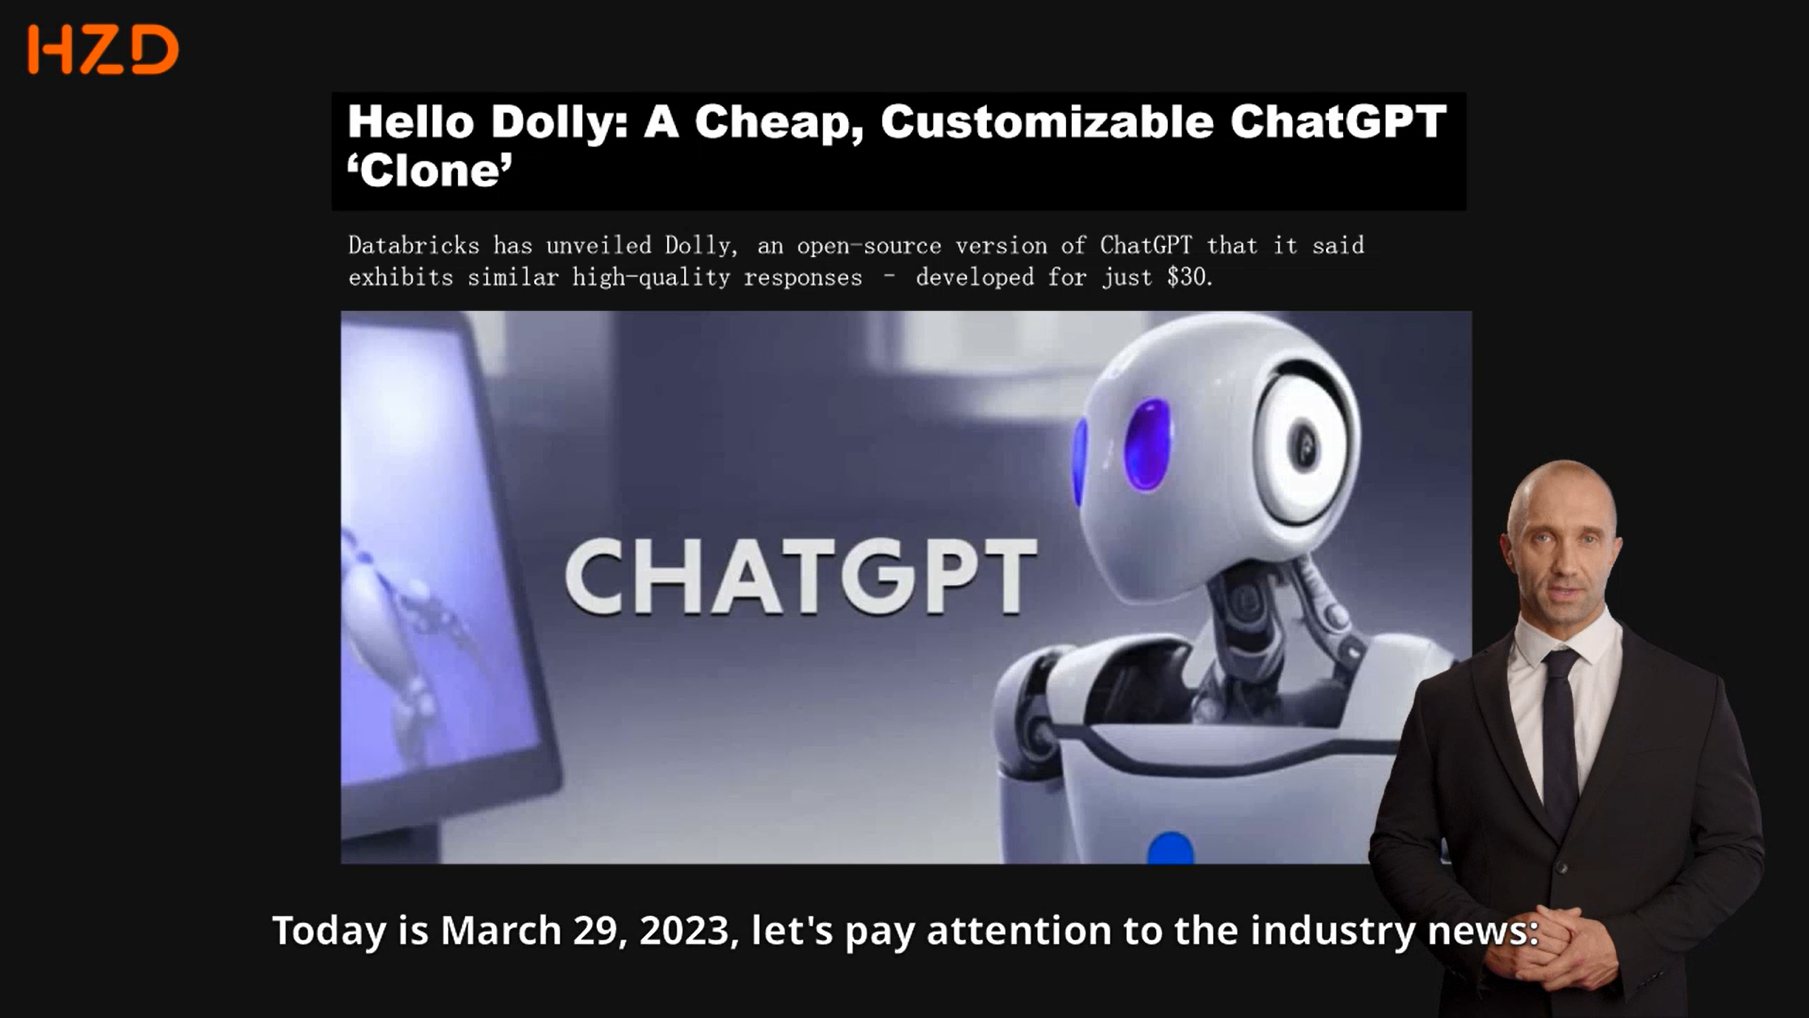 Hello Dolly: A Cheap, Customizable ChatGPT ‘Clone’